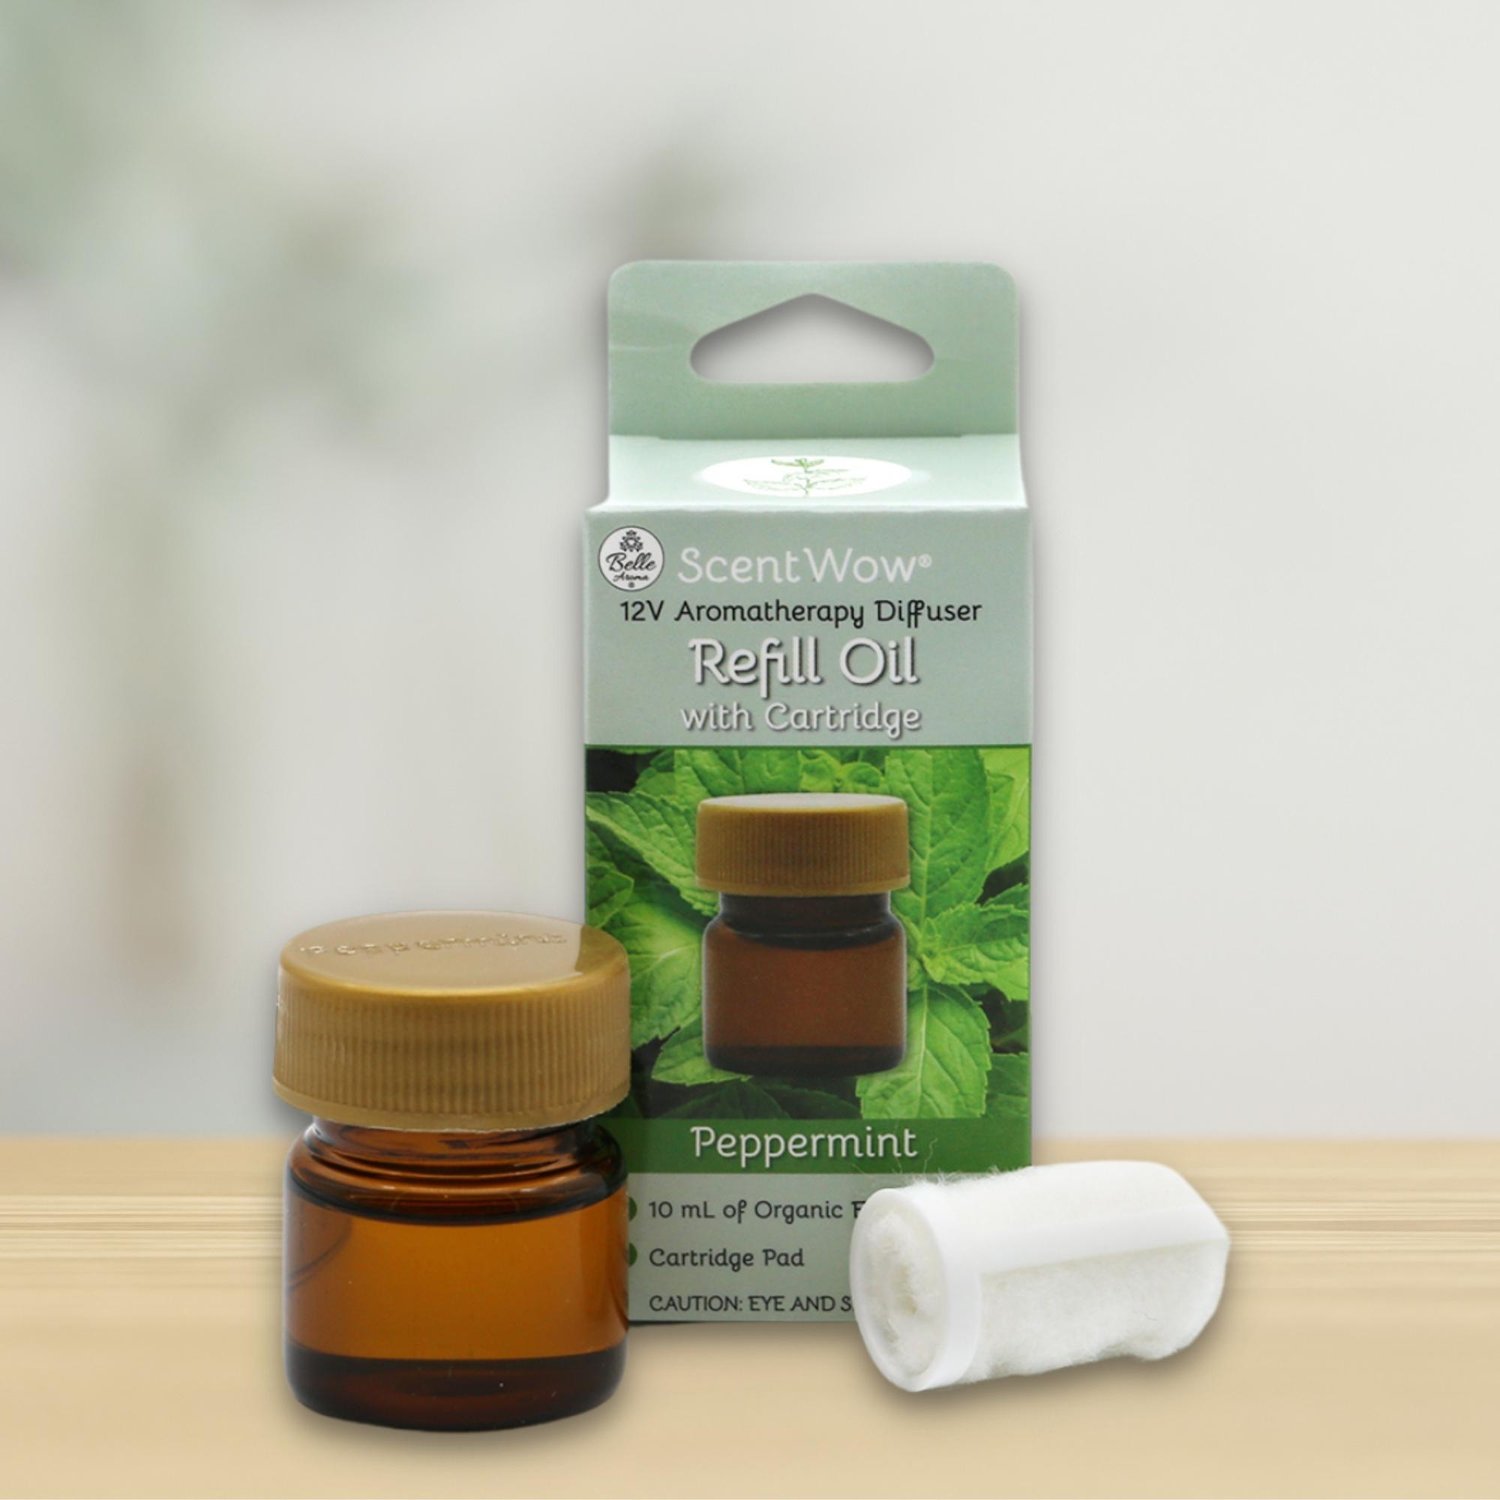 Refill Kit with Organic Peppermint Essential Oil & Cartridge for the ScentWow Aromatherapy Diffuser